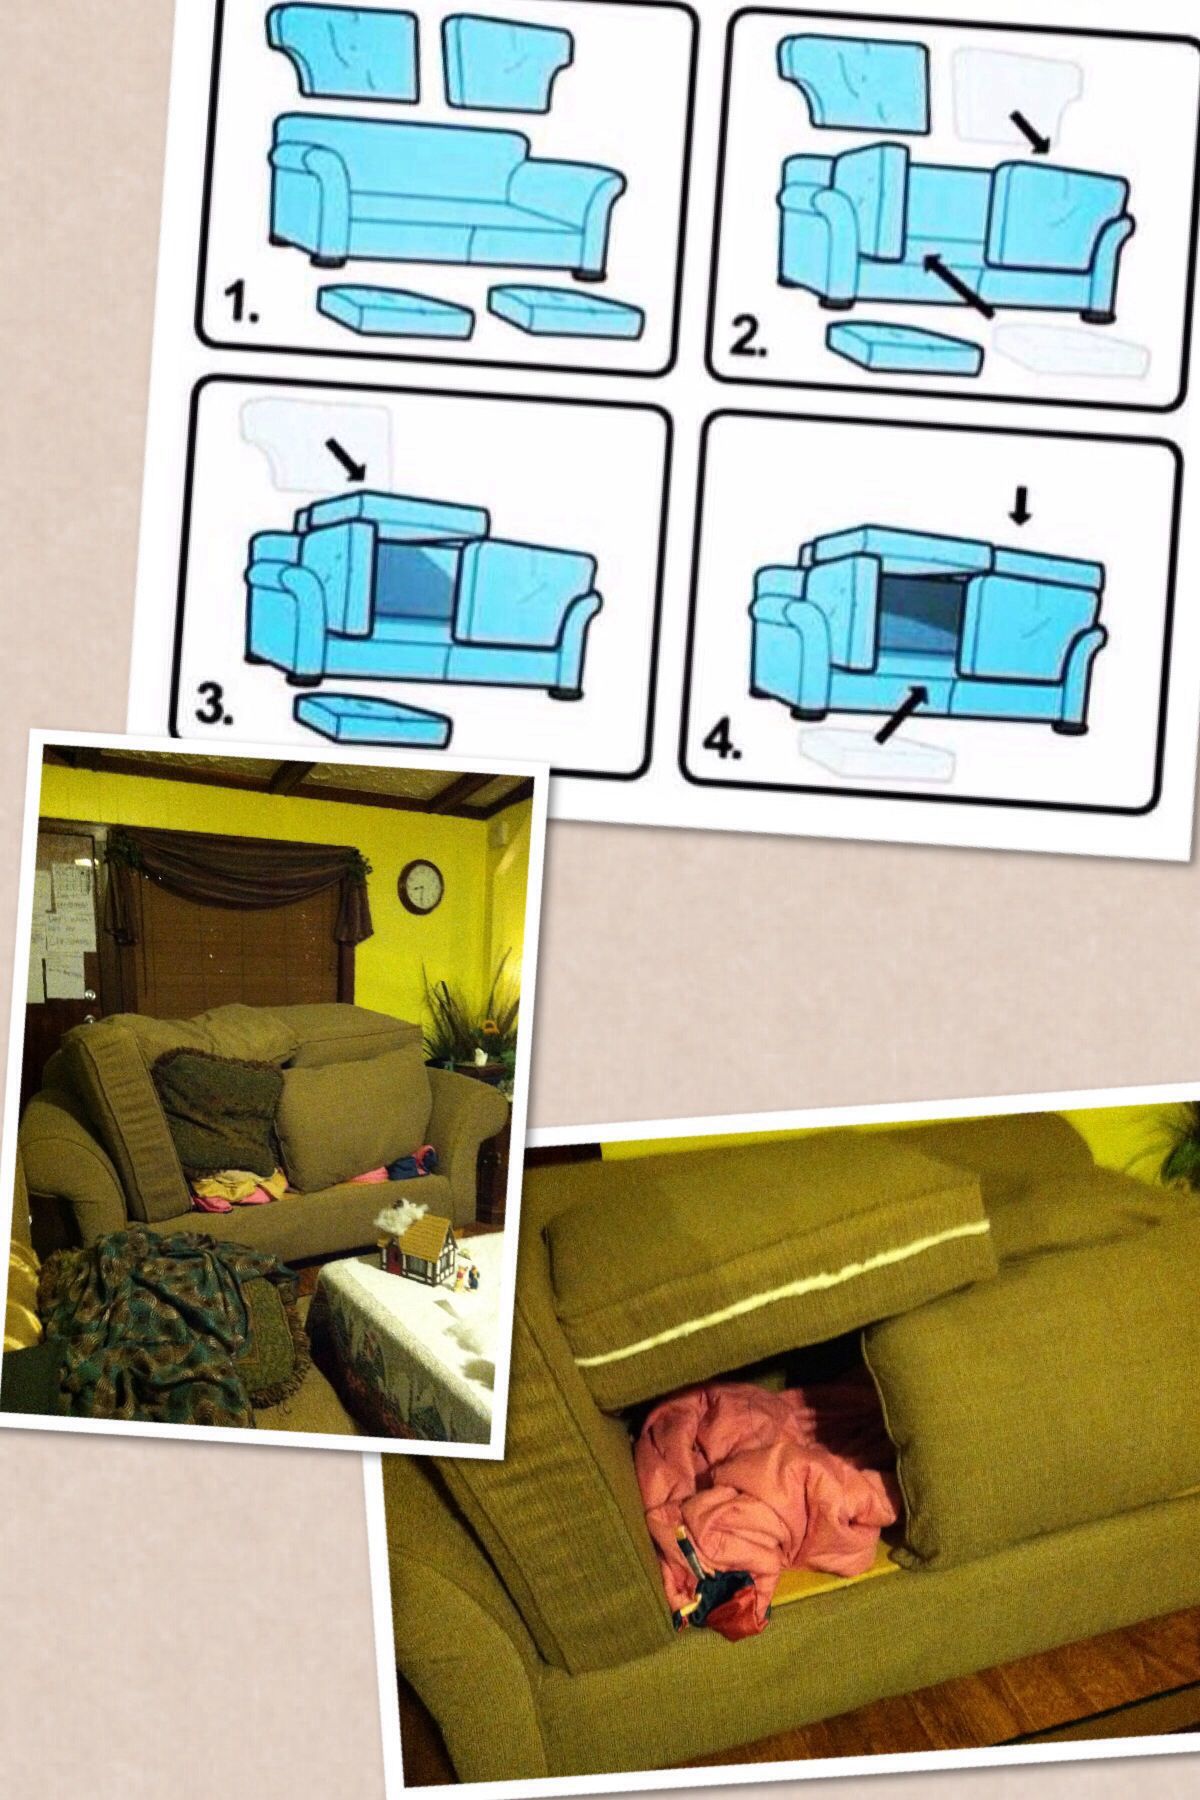 i made my own Couch fort! - meme